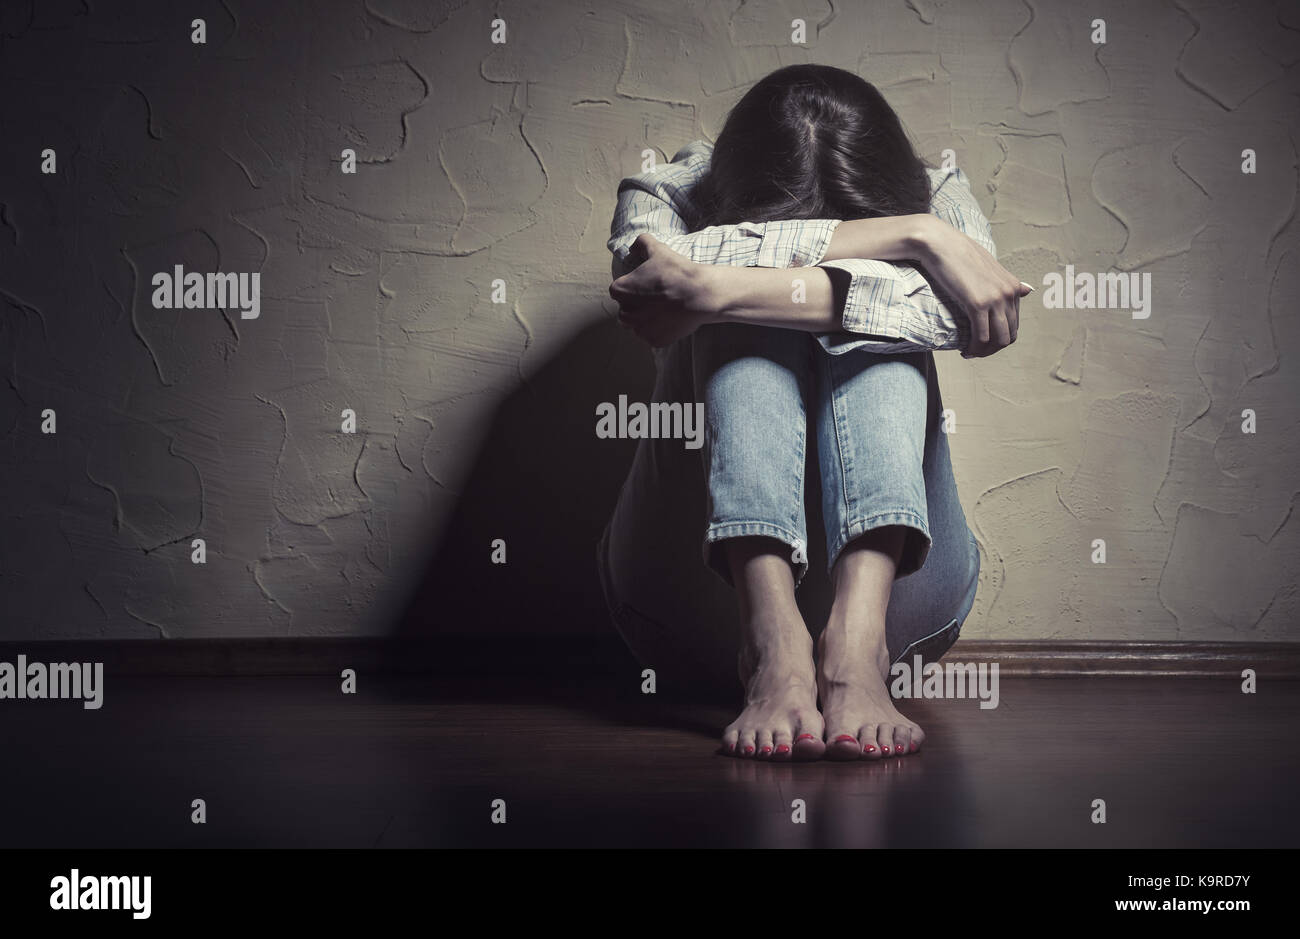 Young sad woman sitting alone on the floor in an empty room Stock Photo